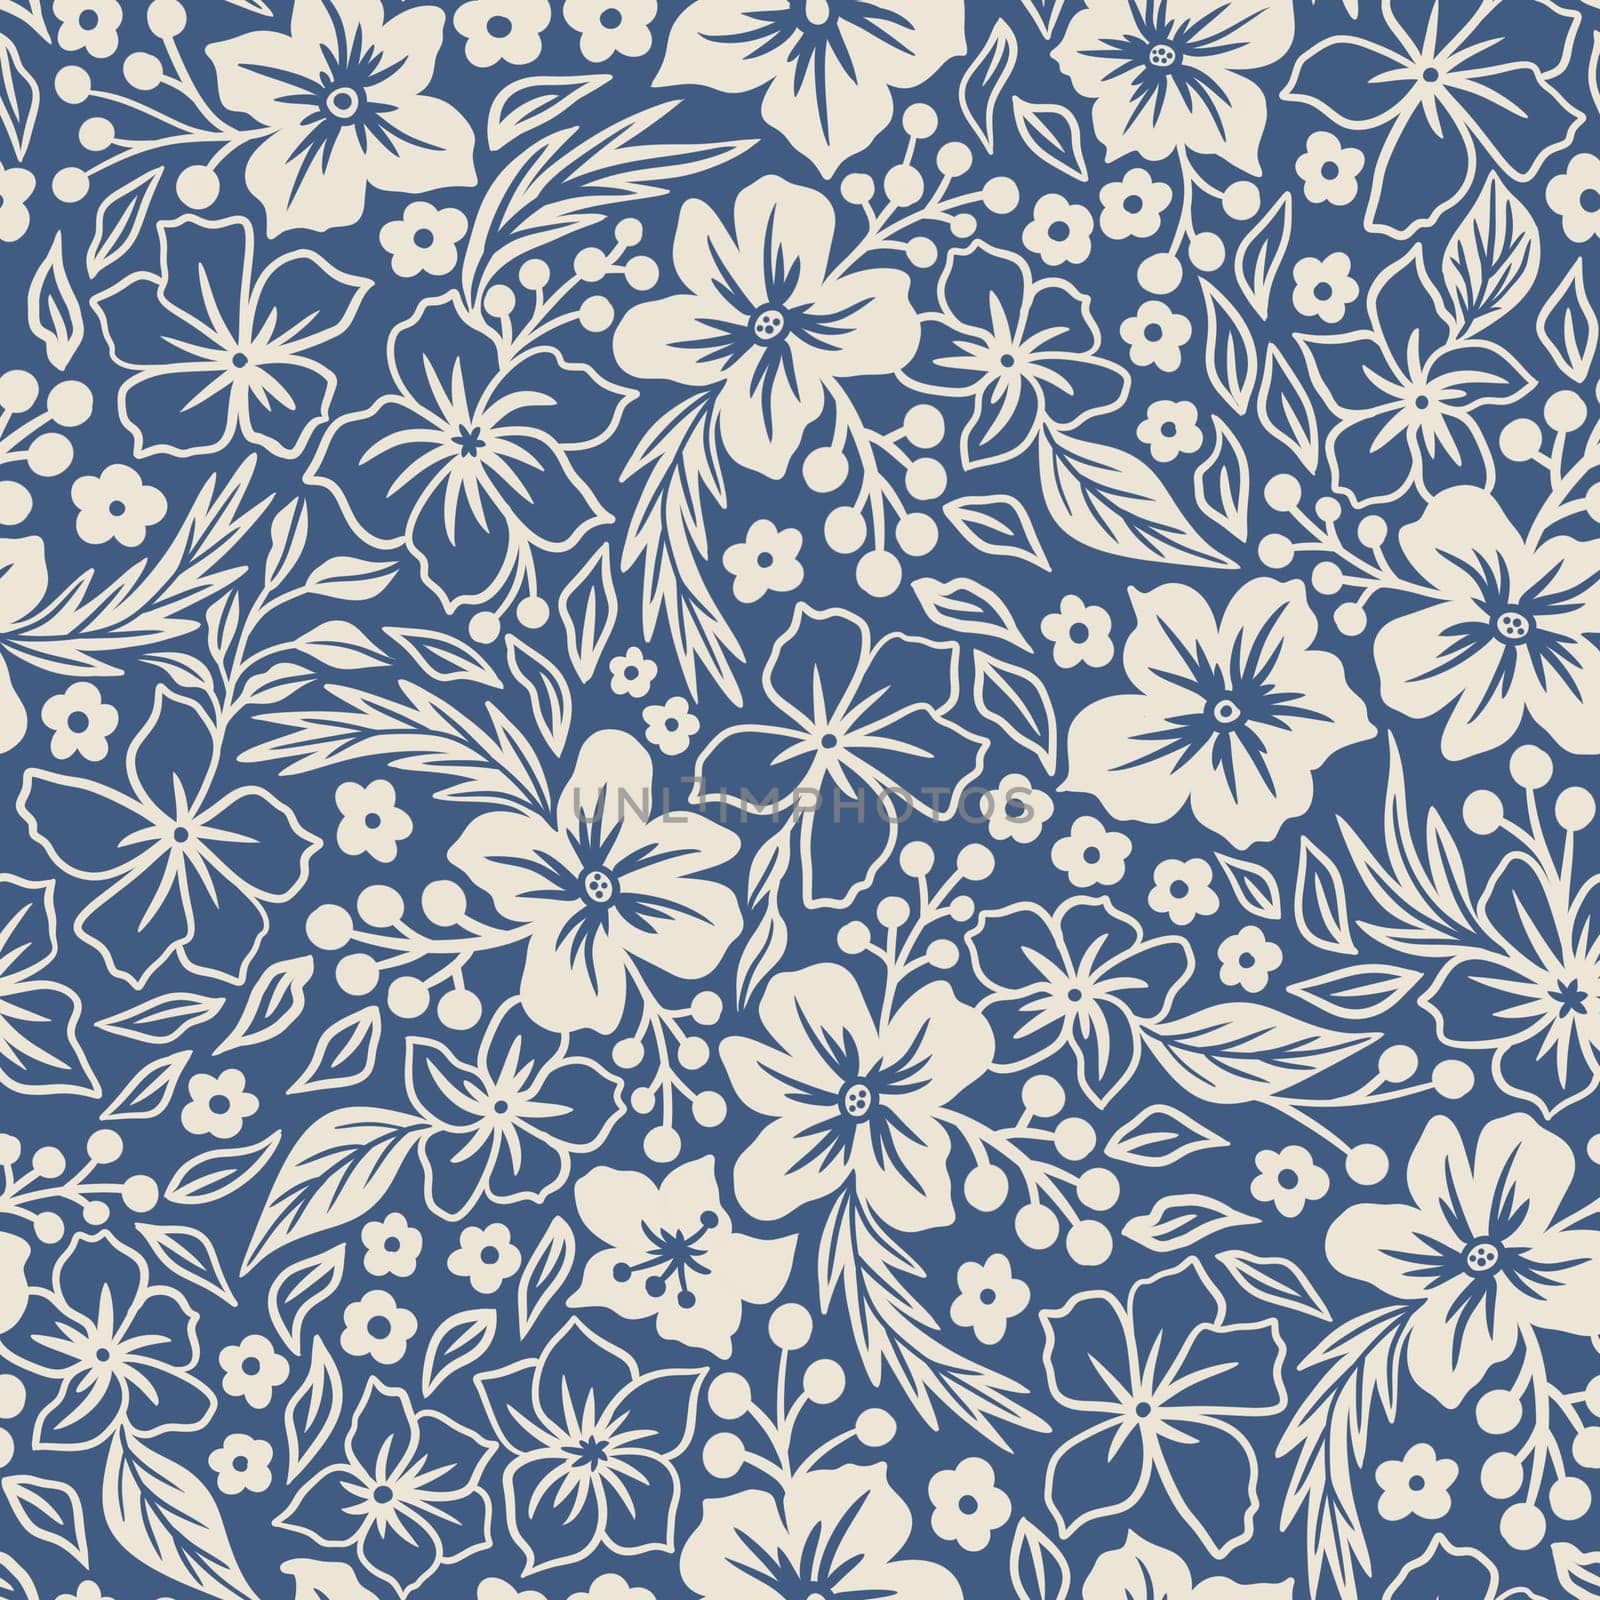 Hand drawn seamless pattern with blue white flowers berries leaves in Chinoiserie wedgewood style. Elegant botanical illustration bloom blossom spring summer garden, bouquet textile fabric wallpaper, realistic romantic vintage print